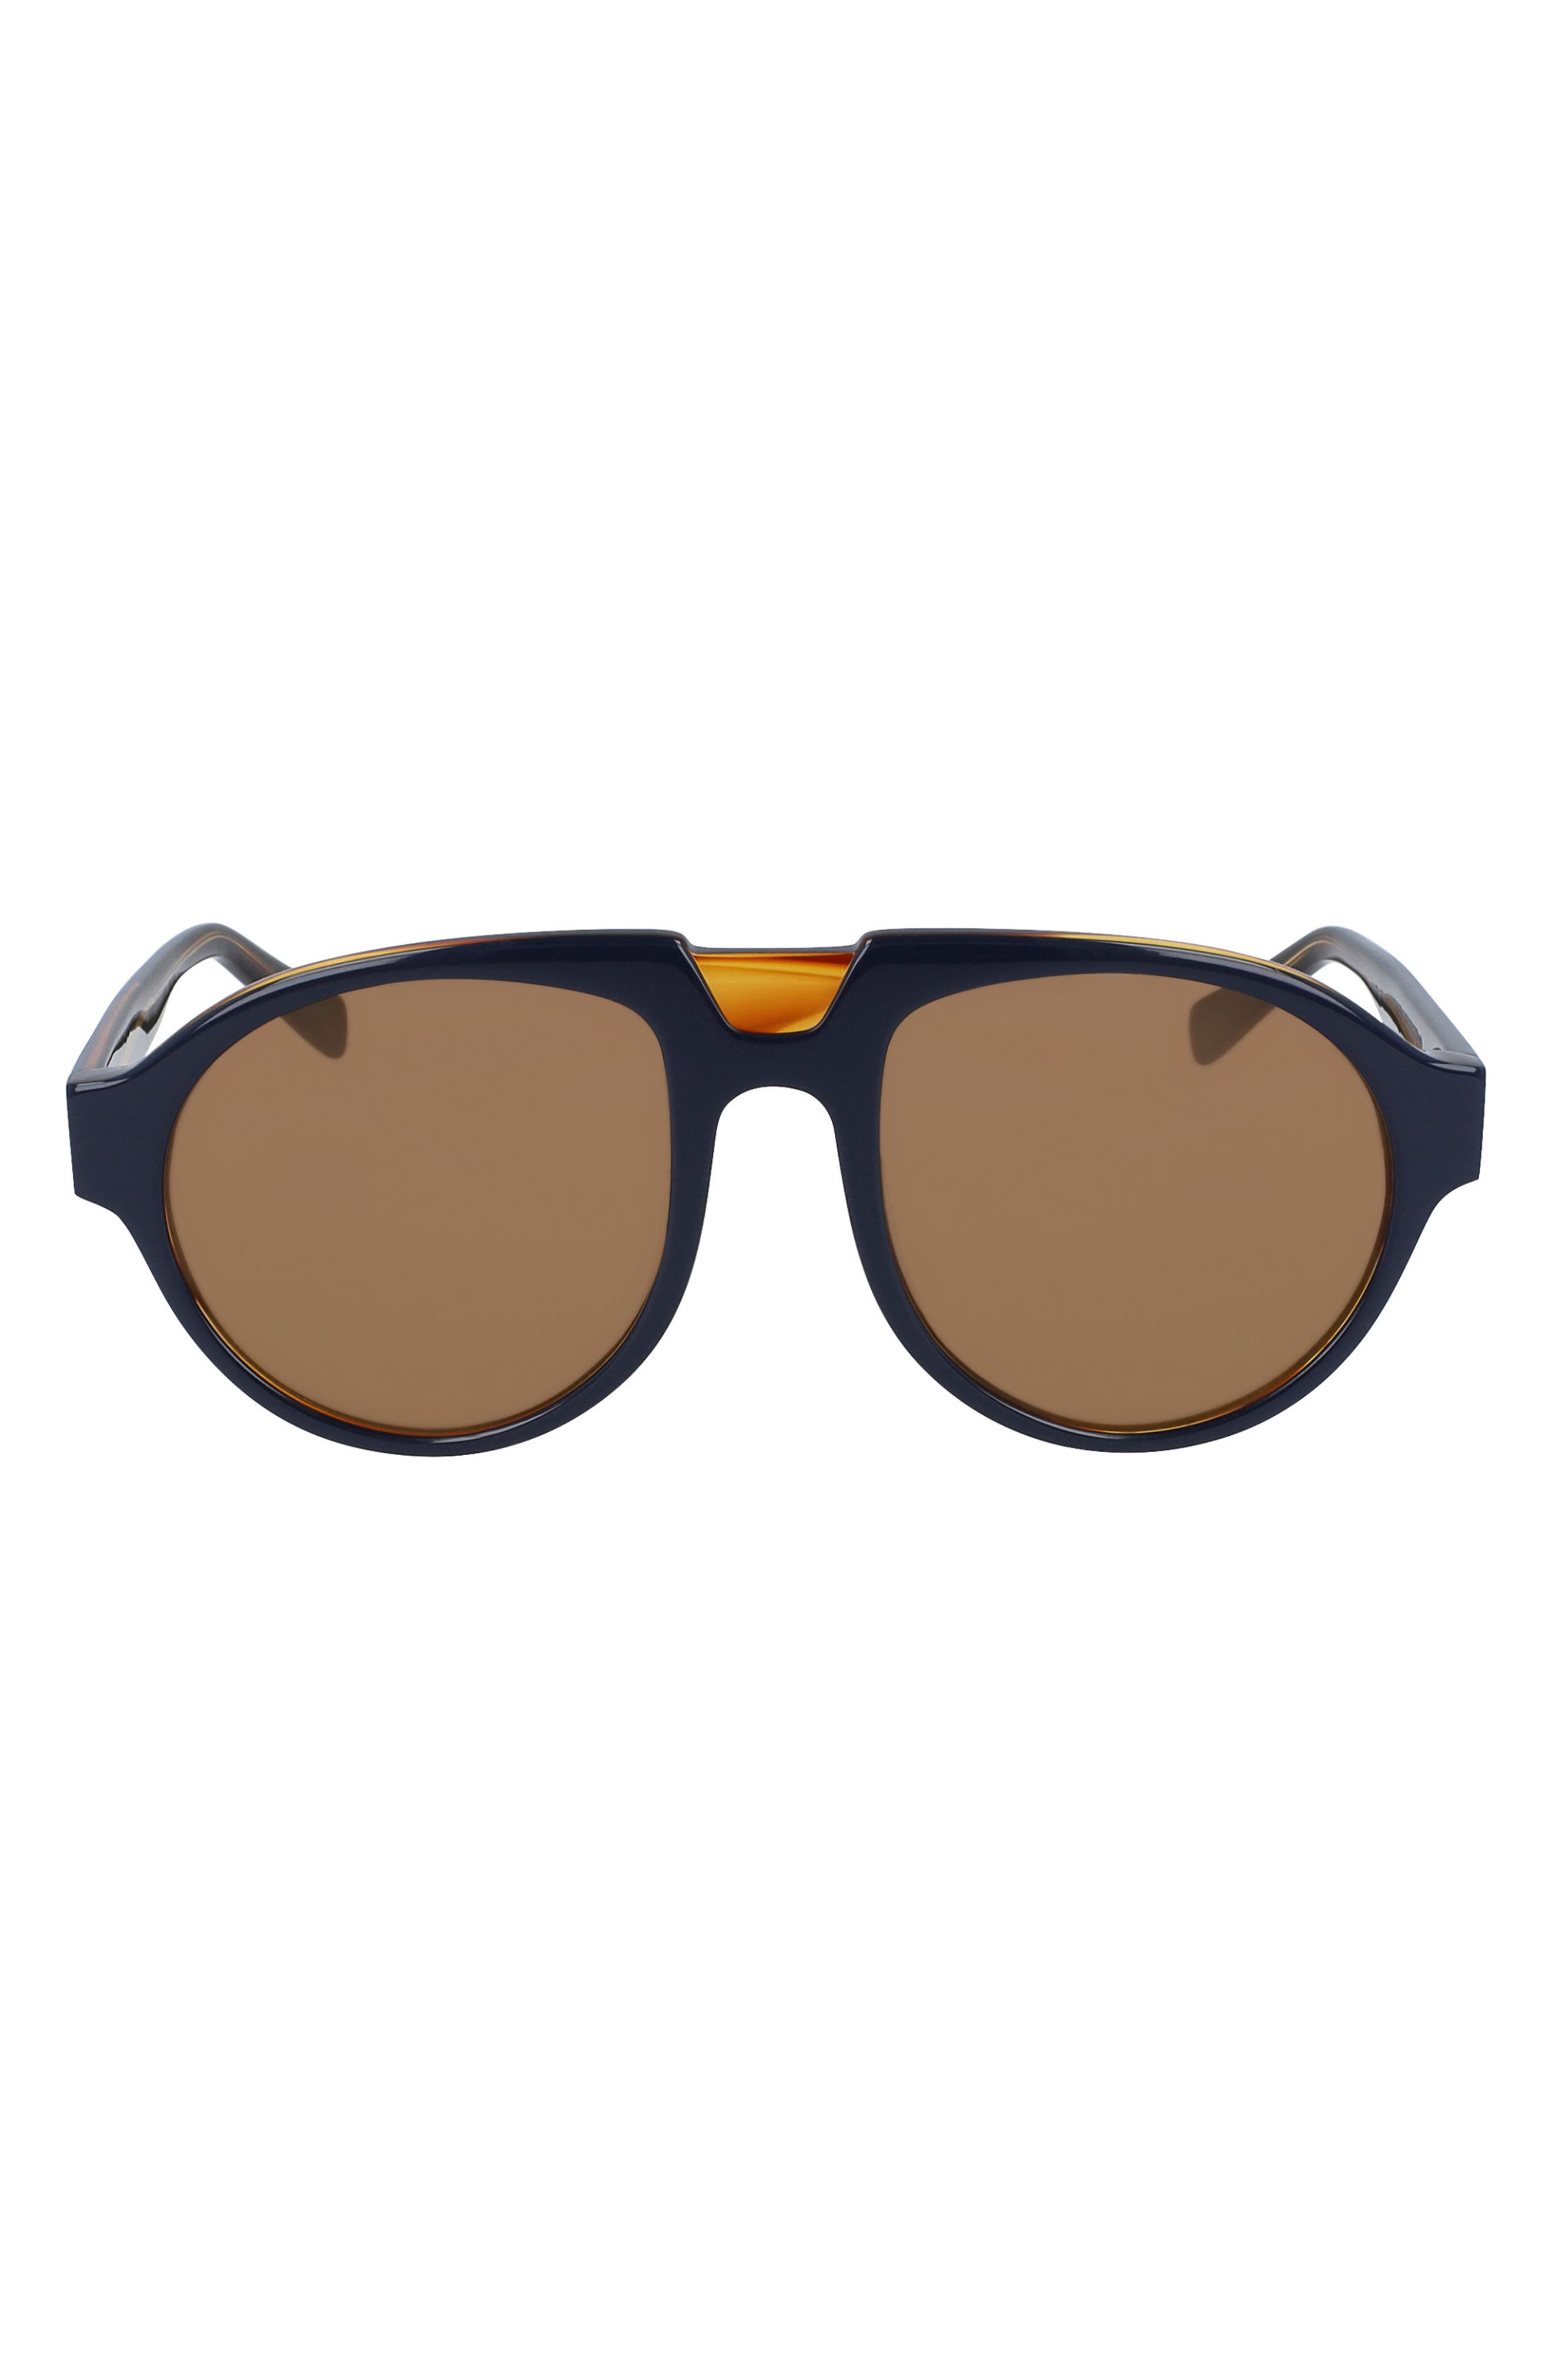 MCM 54mm Aviator Sunglasses in Blue Amber/Brown at Nordstrom